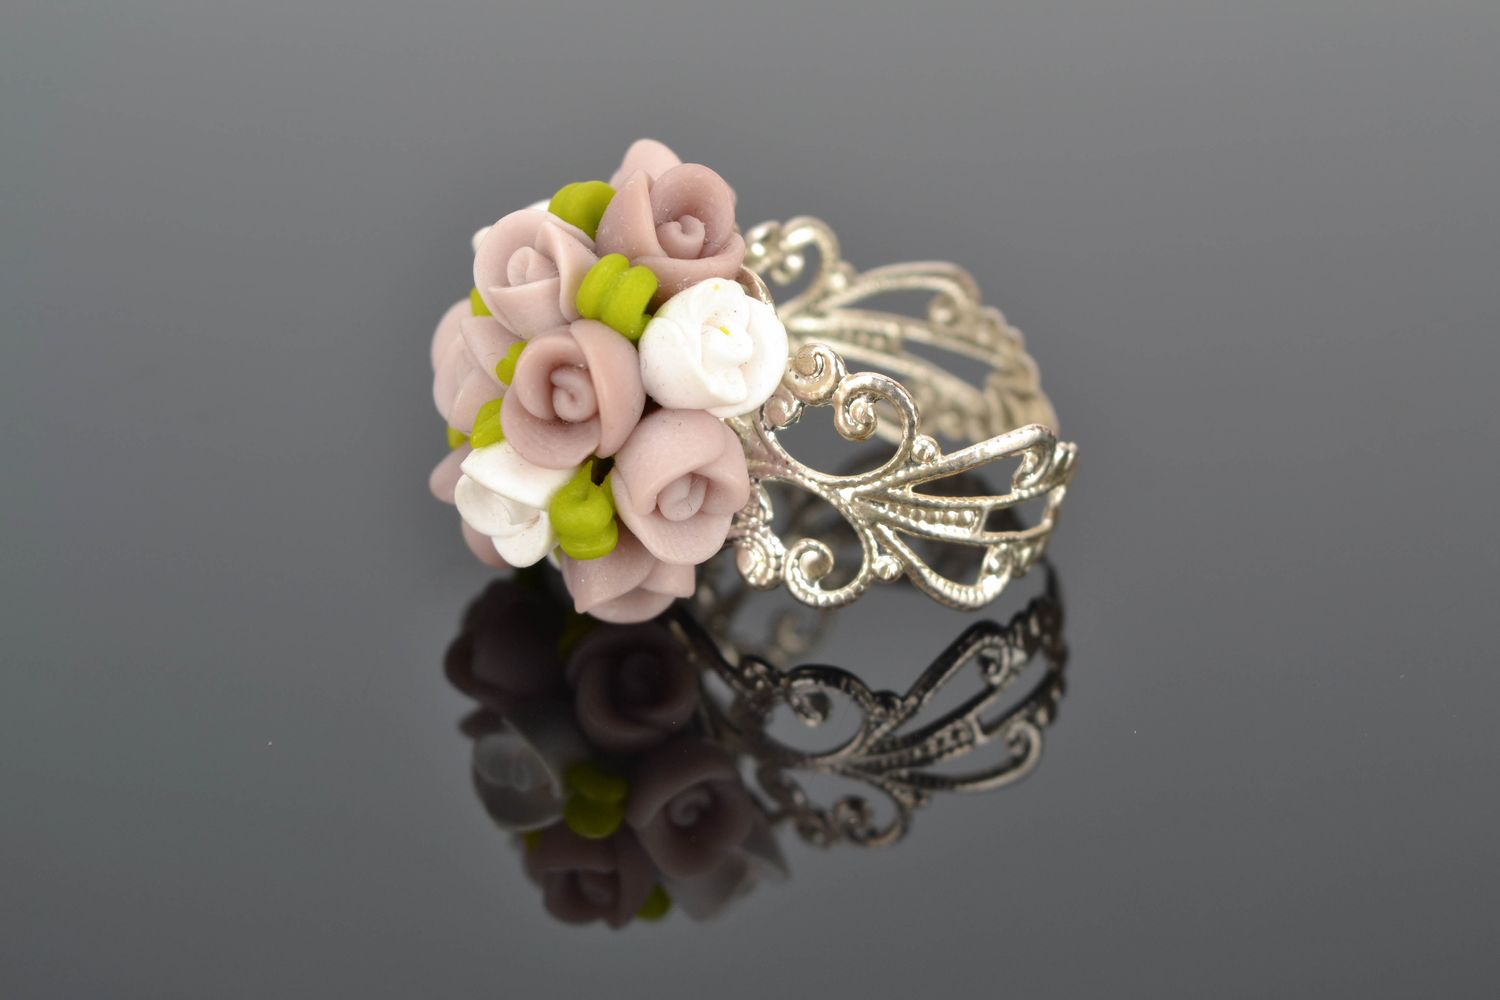 Polymer clay flower ring photo 1